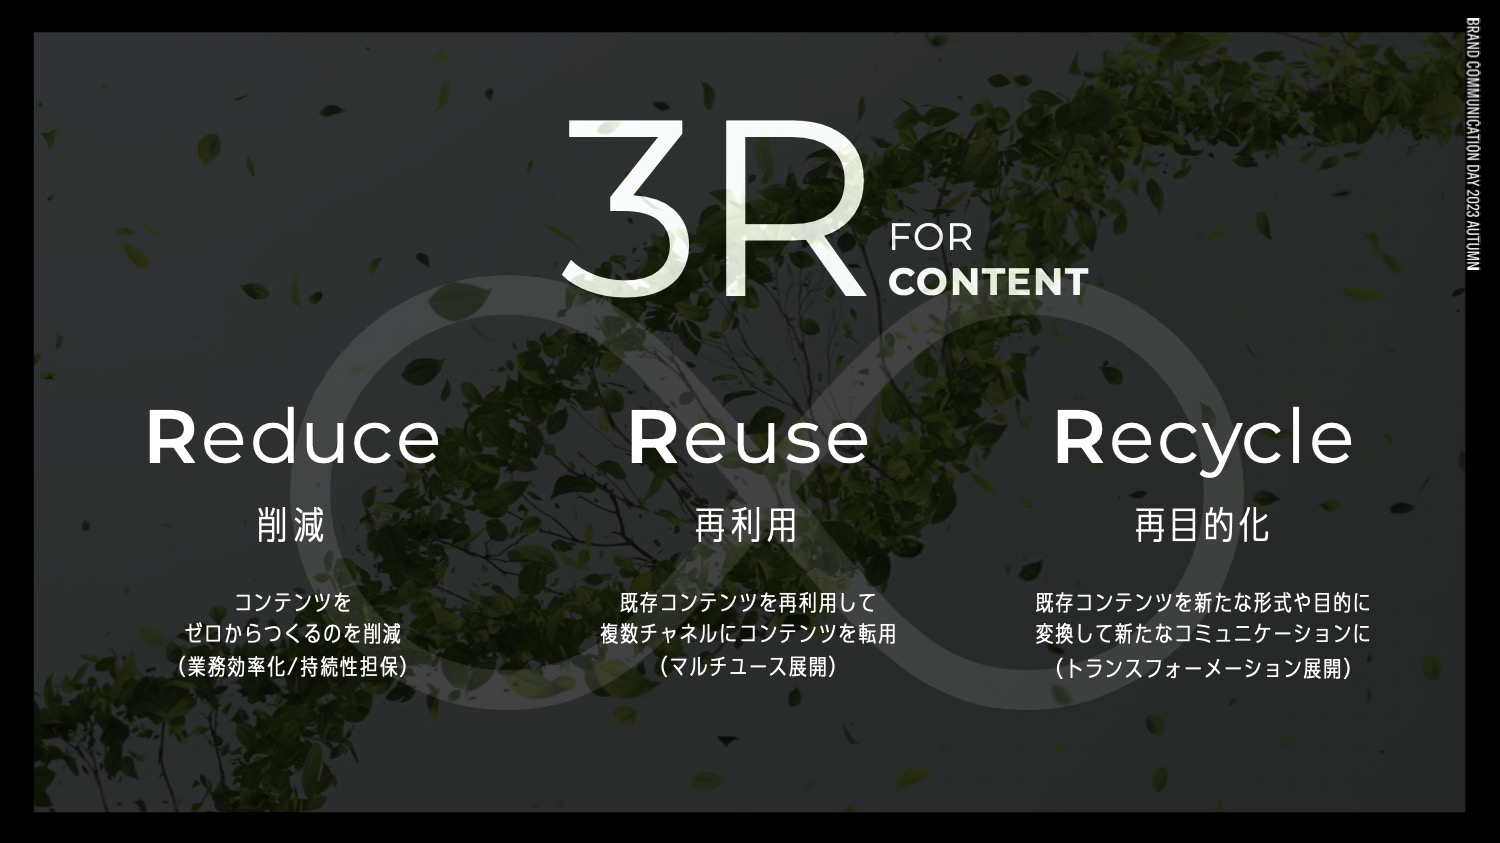 3R for contents